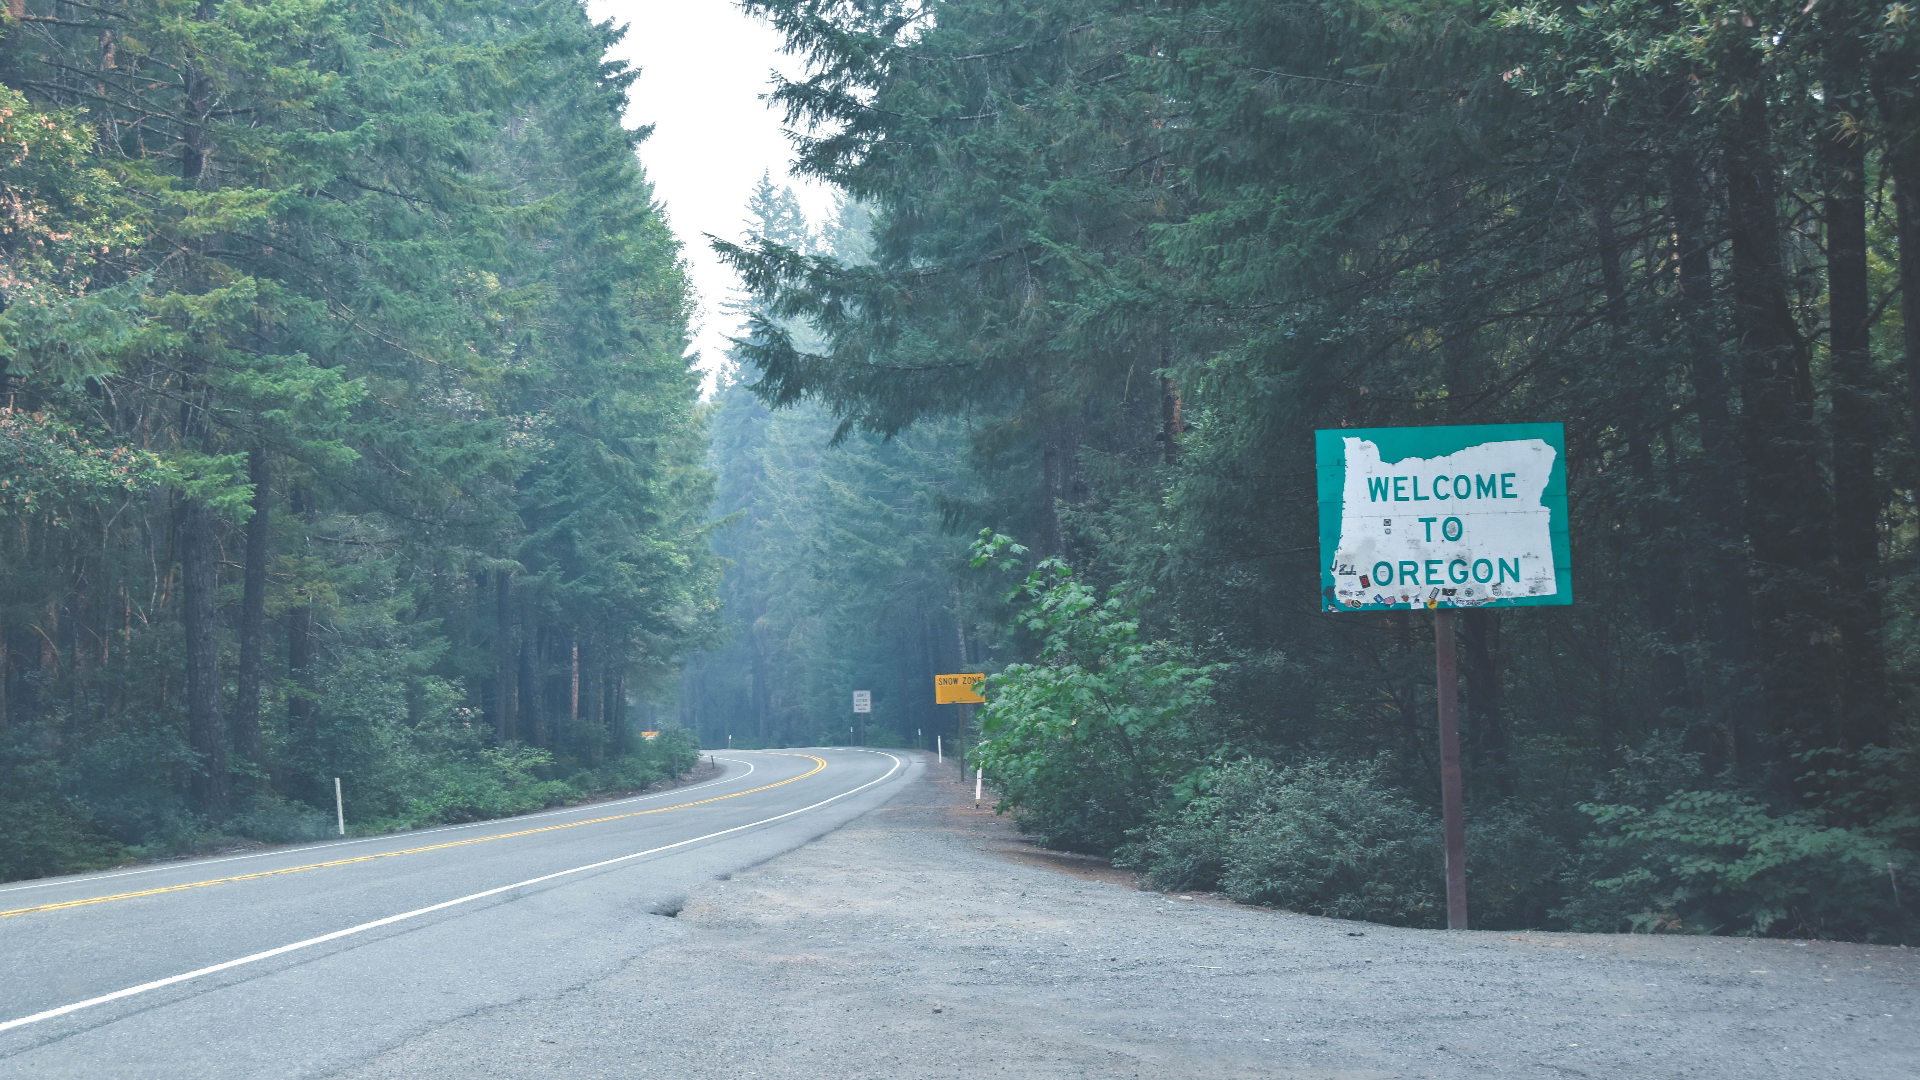 Highway with "Welcome to Oregon" sign